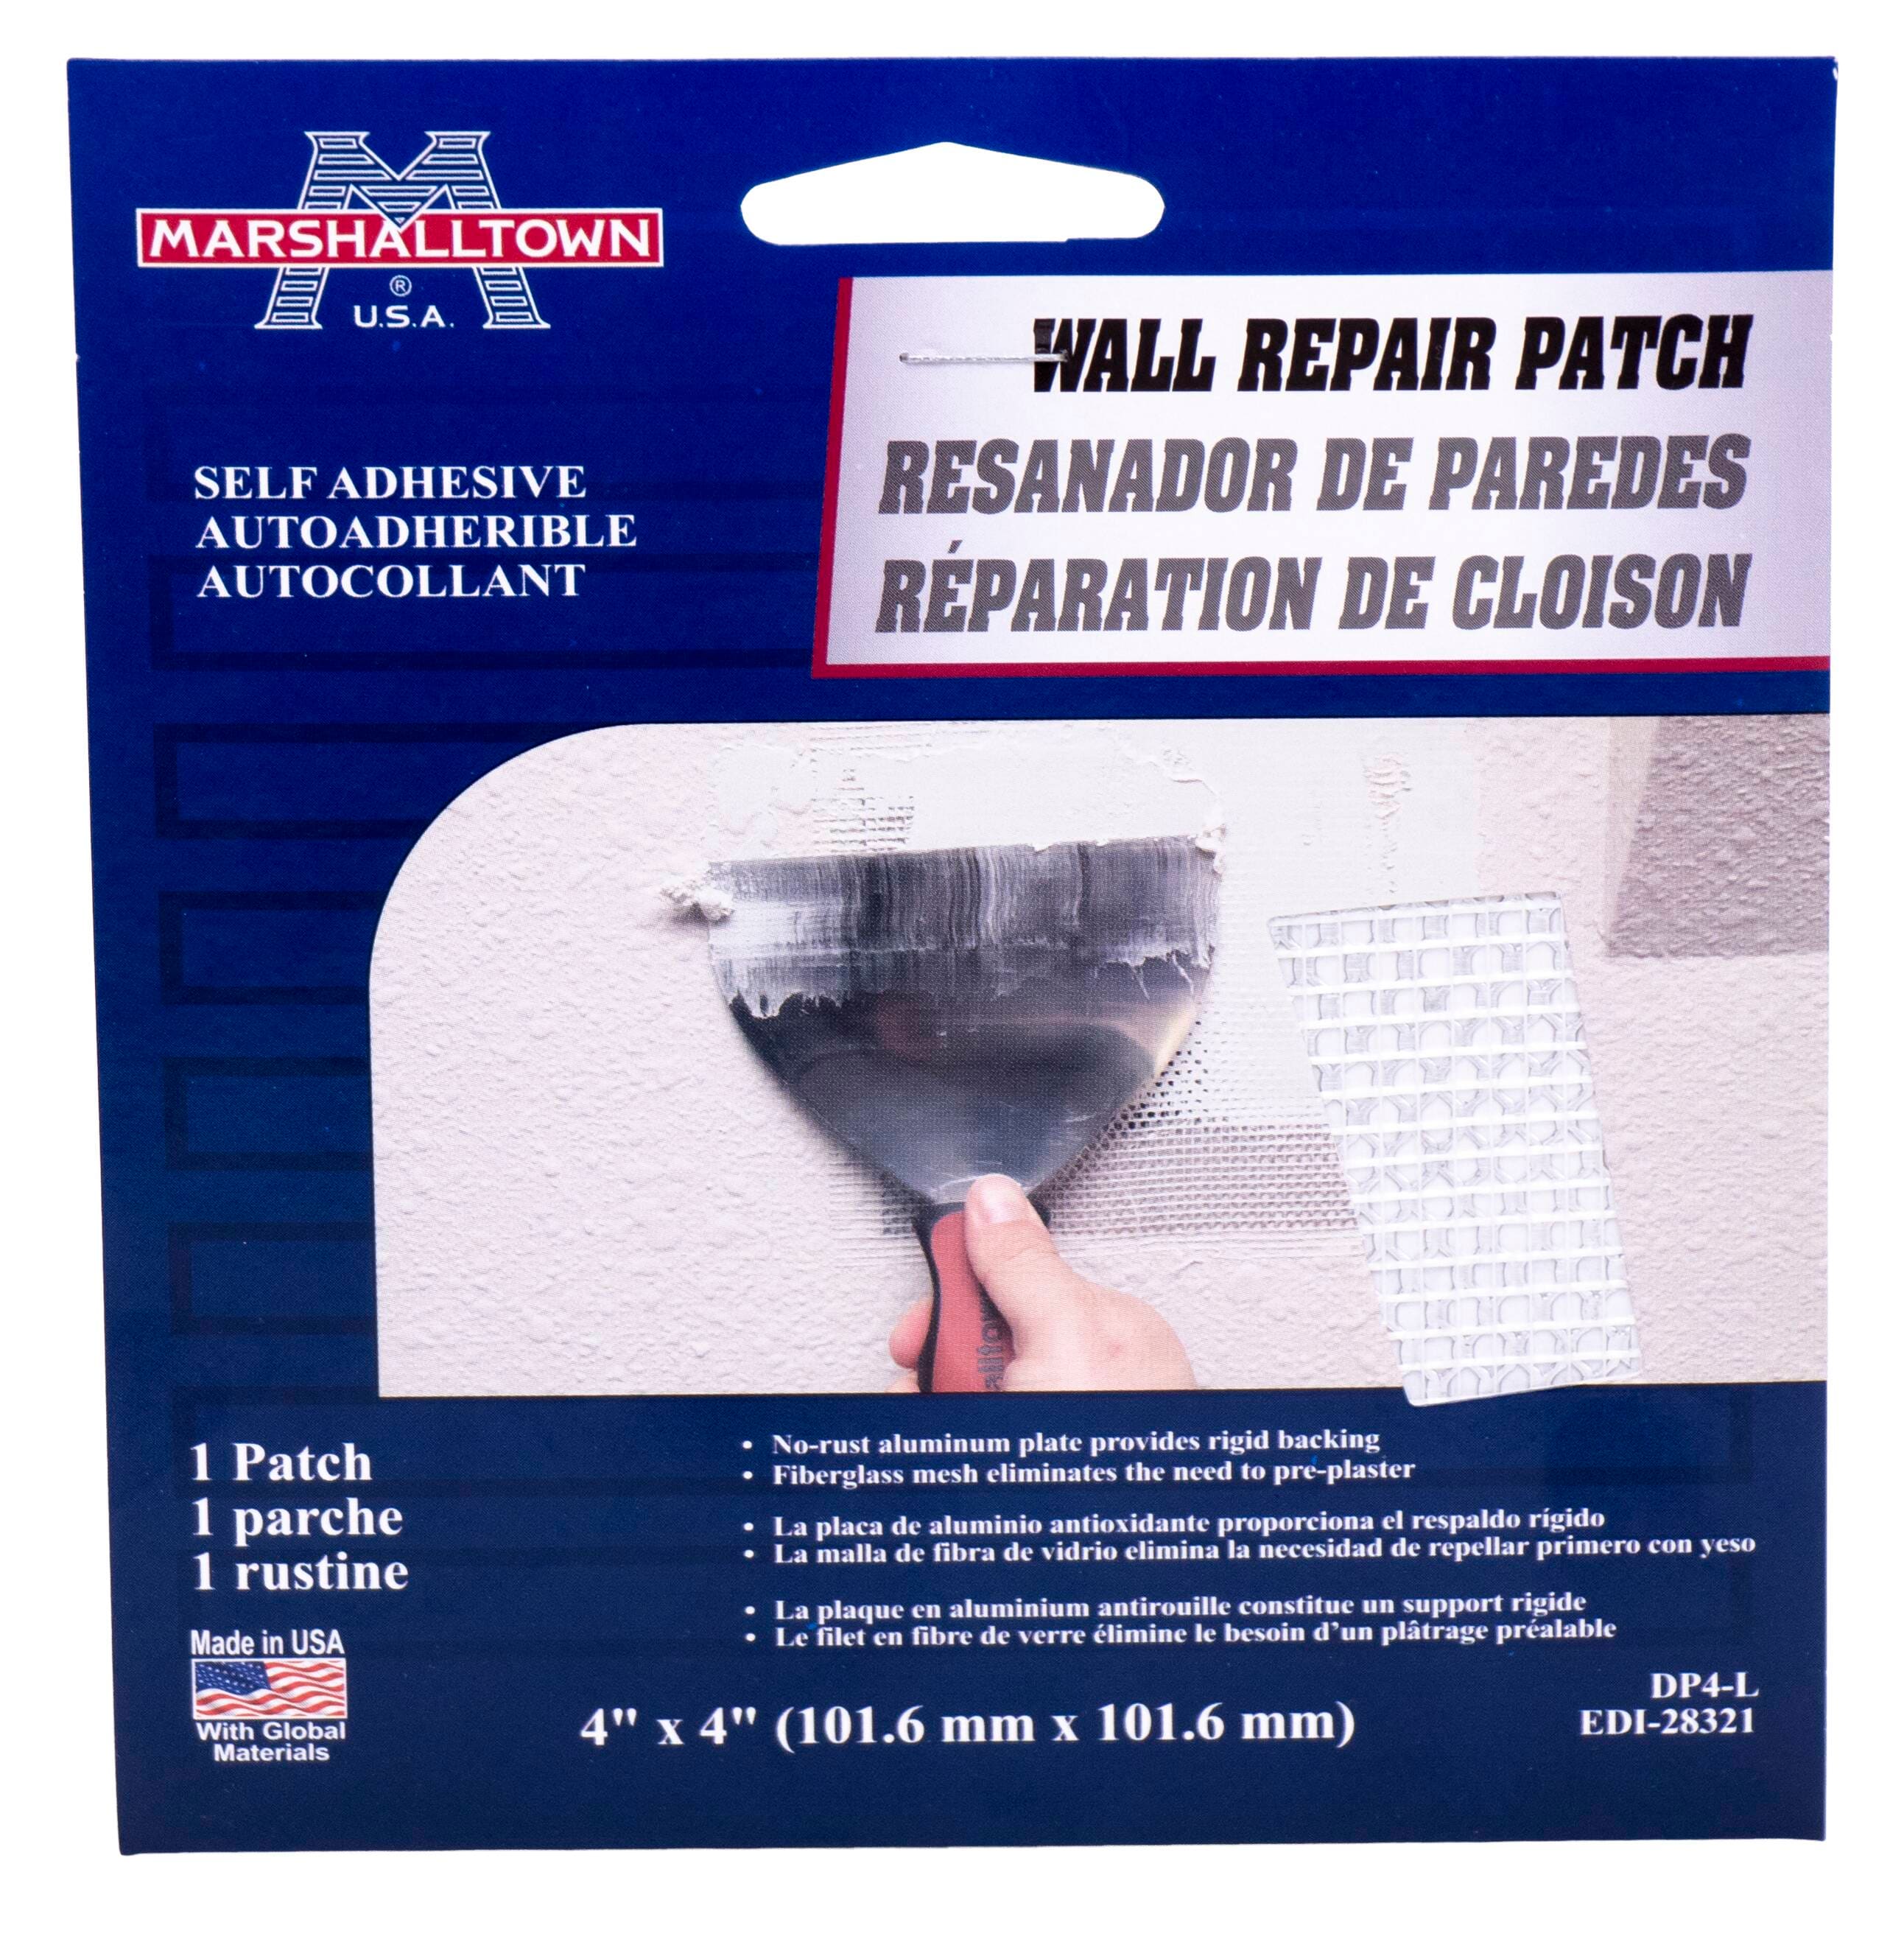 wall patch products for sale